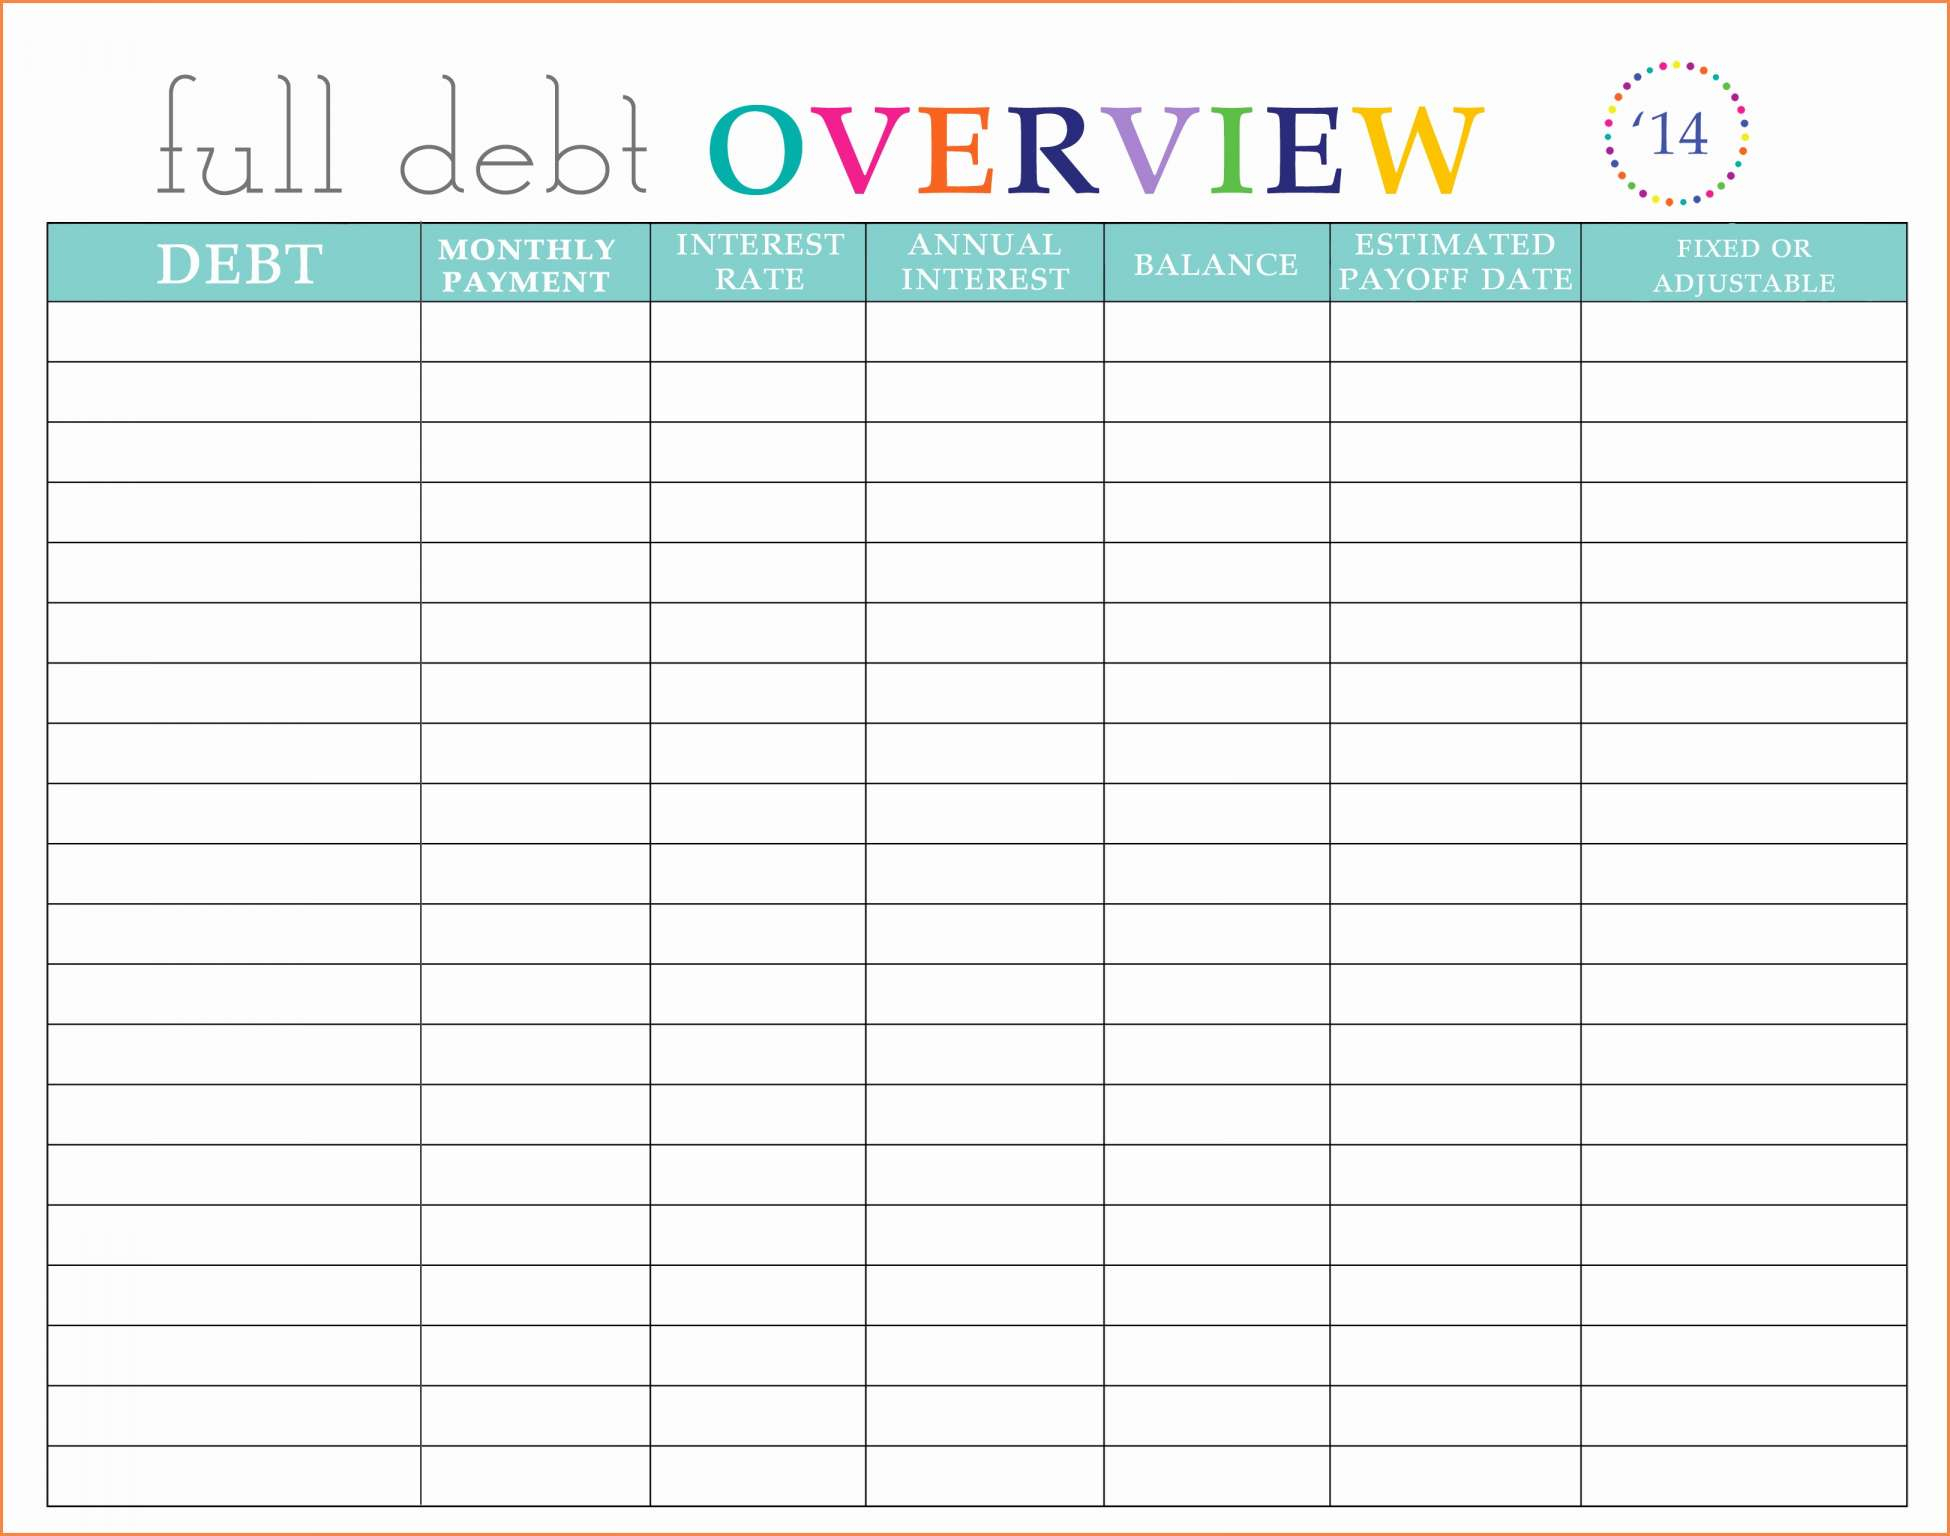 multiple-credit-card-payoff-calculator-spreadsheet-spreadsheet-downloa